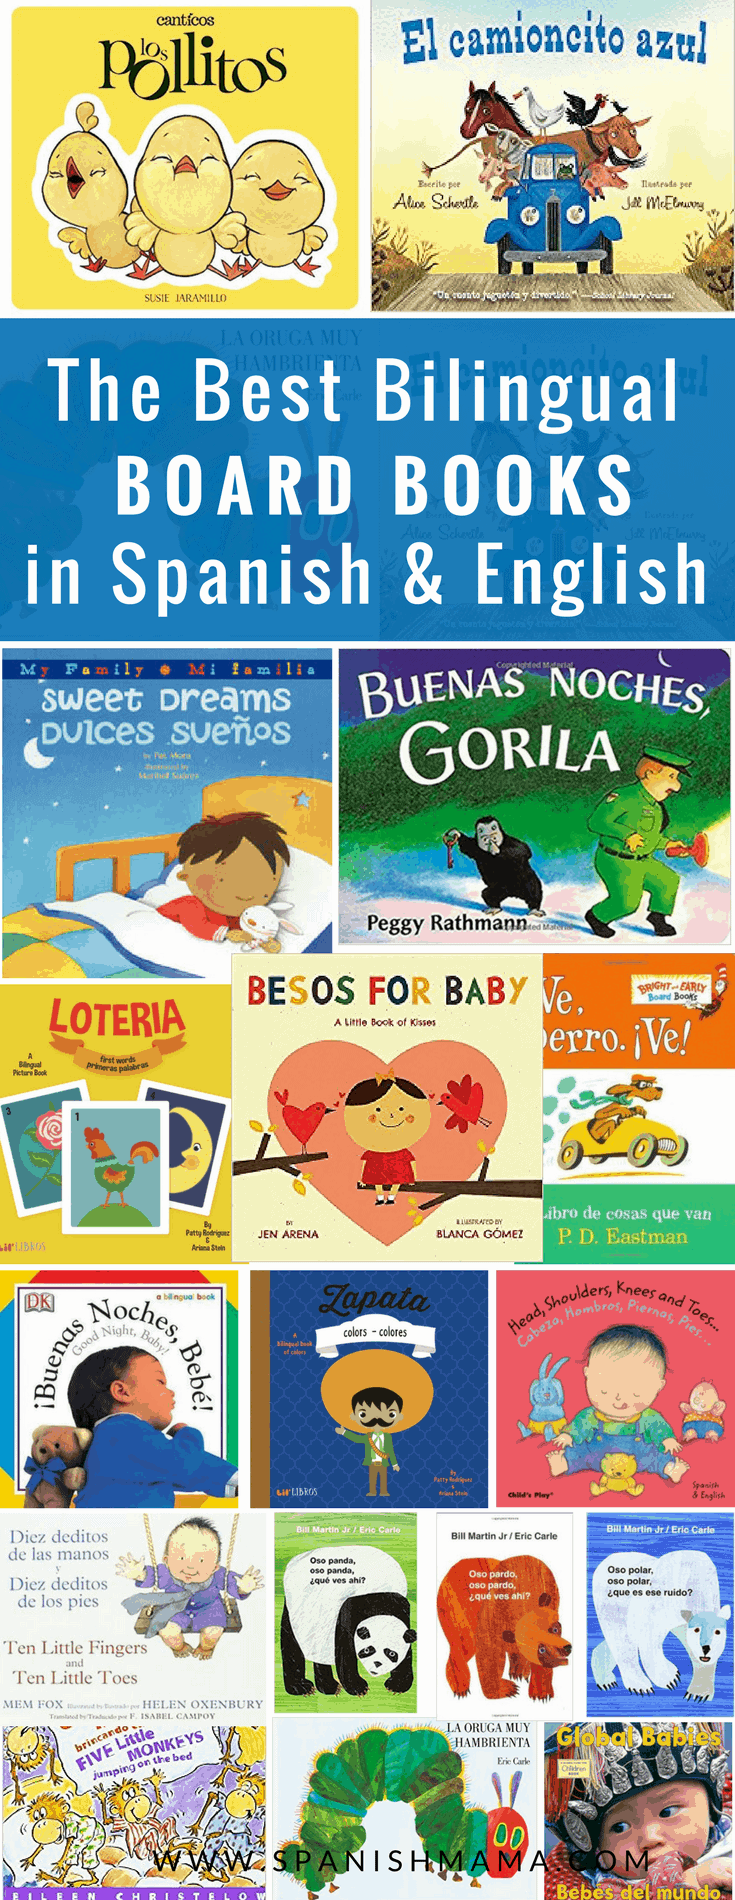 Spanish board books for babies and toddlers